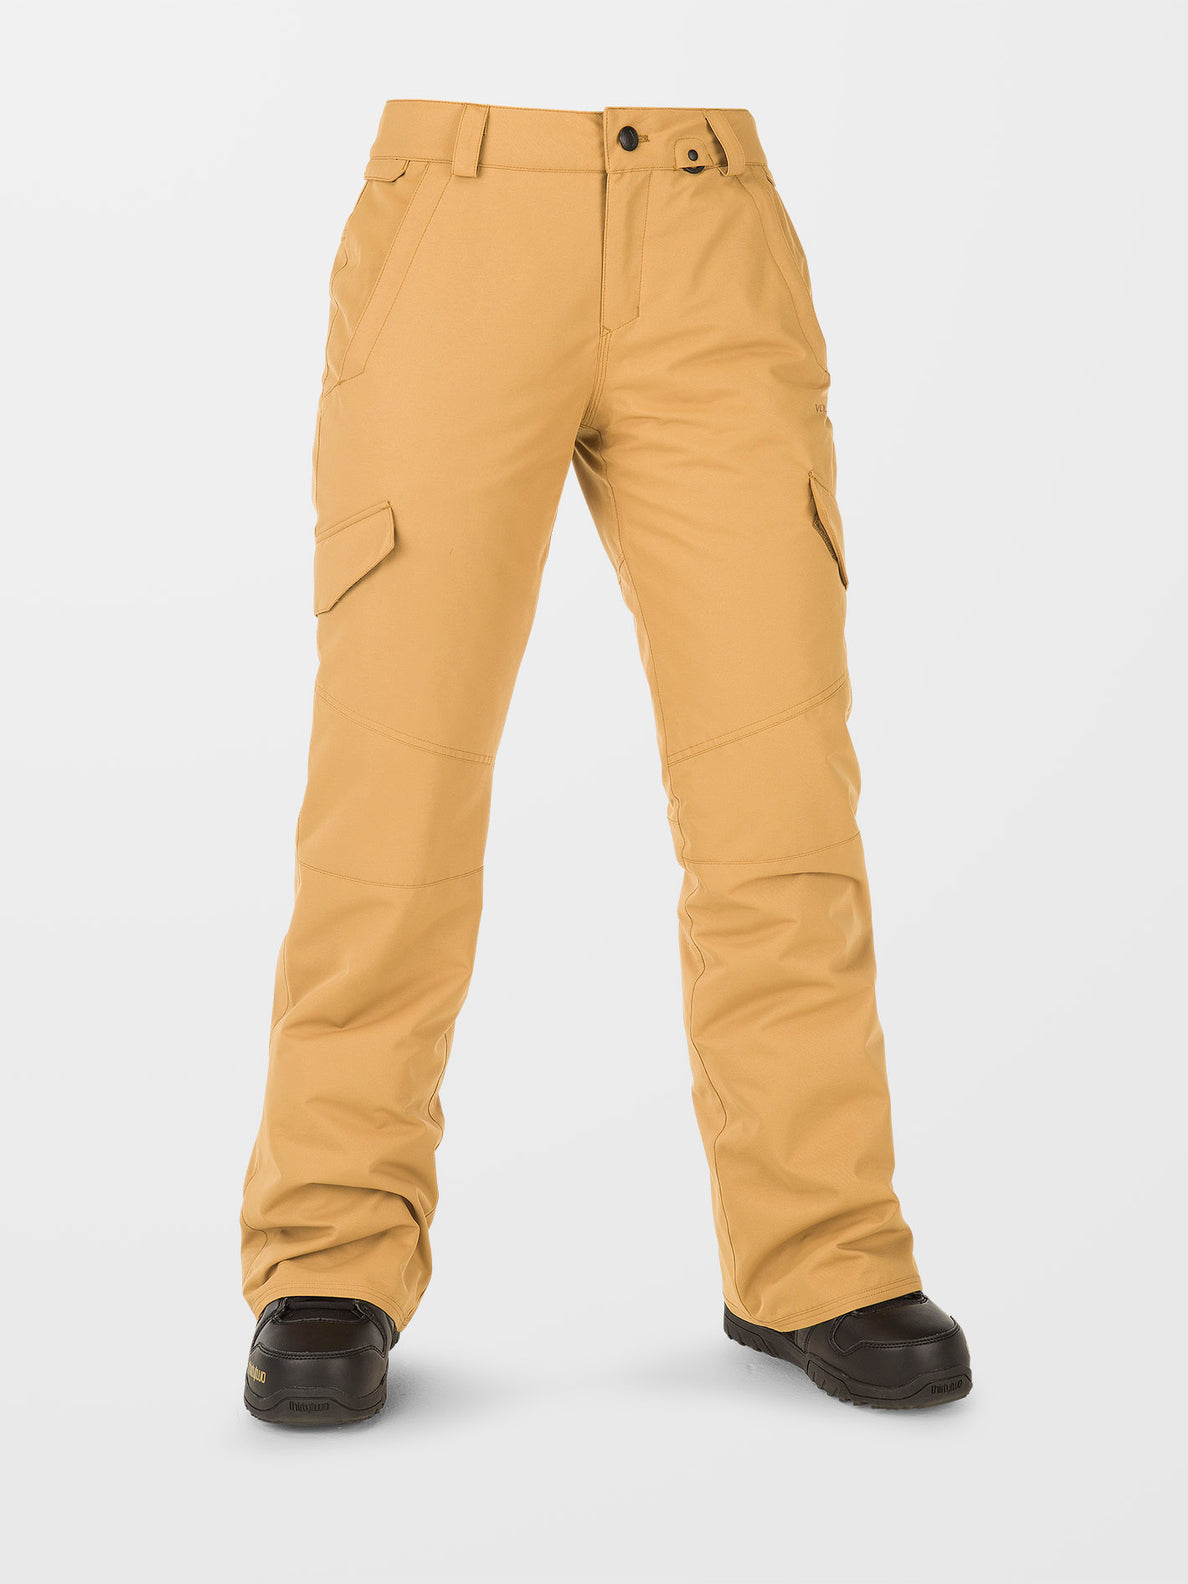 Waterproof Fleece Lined Trousers at Cotton Traders